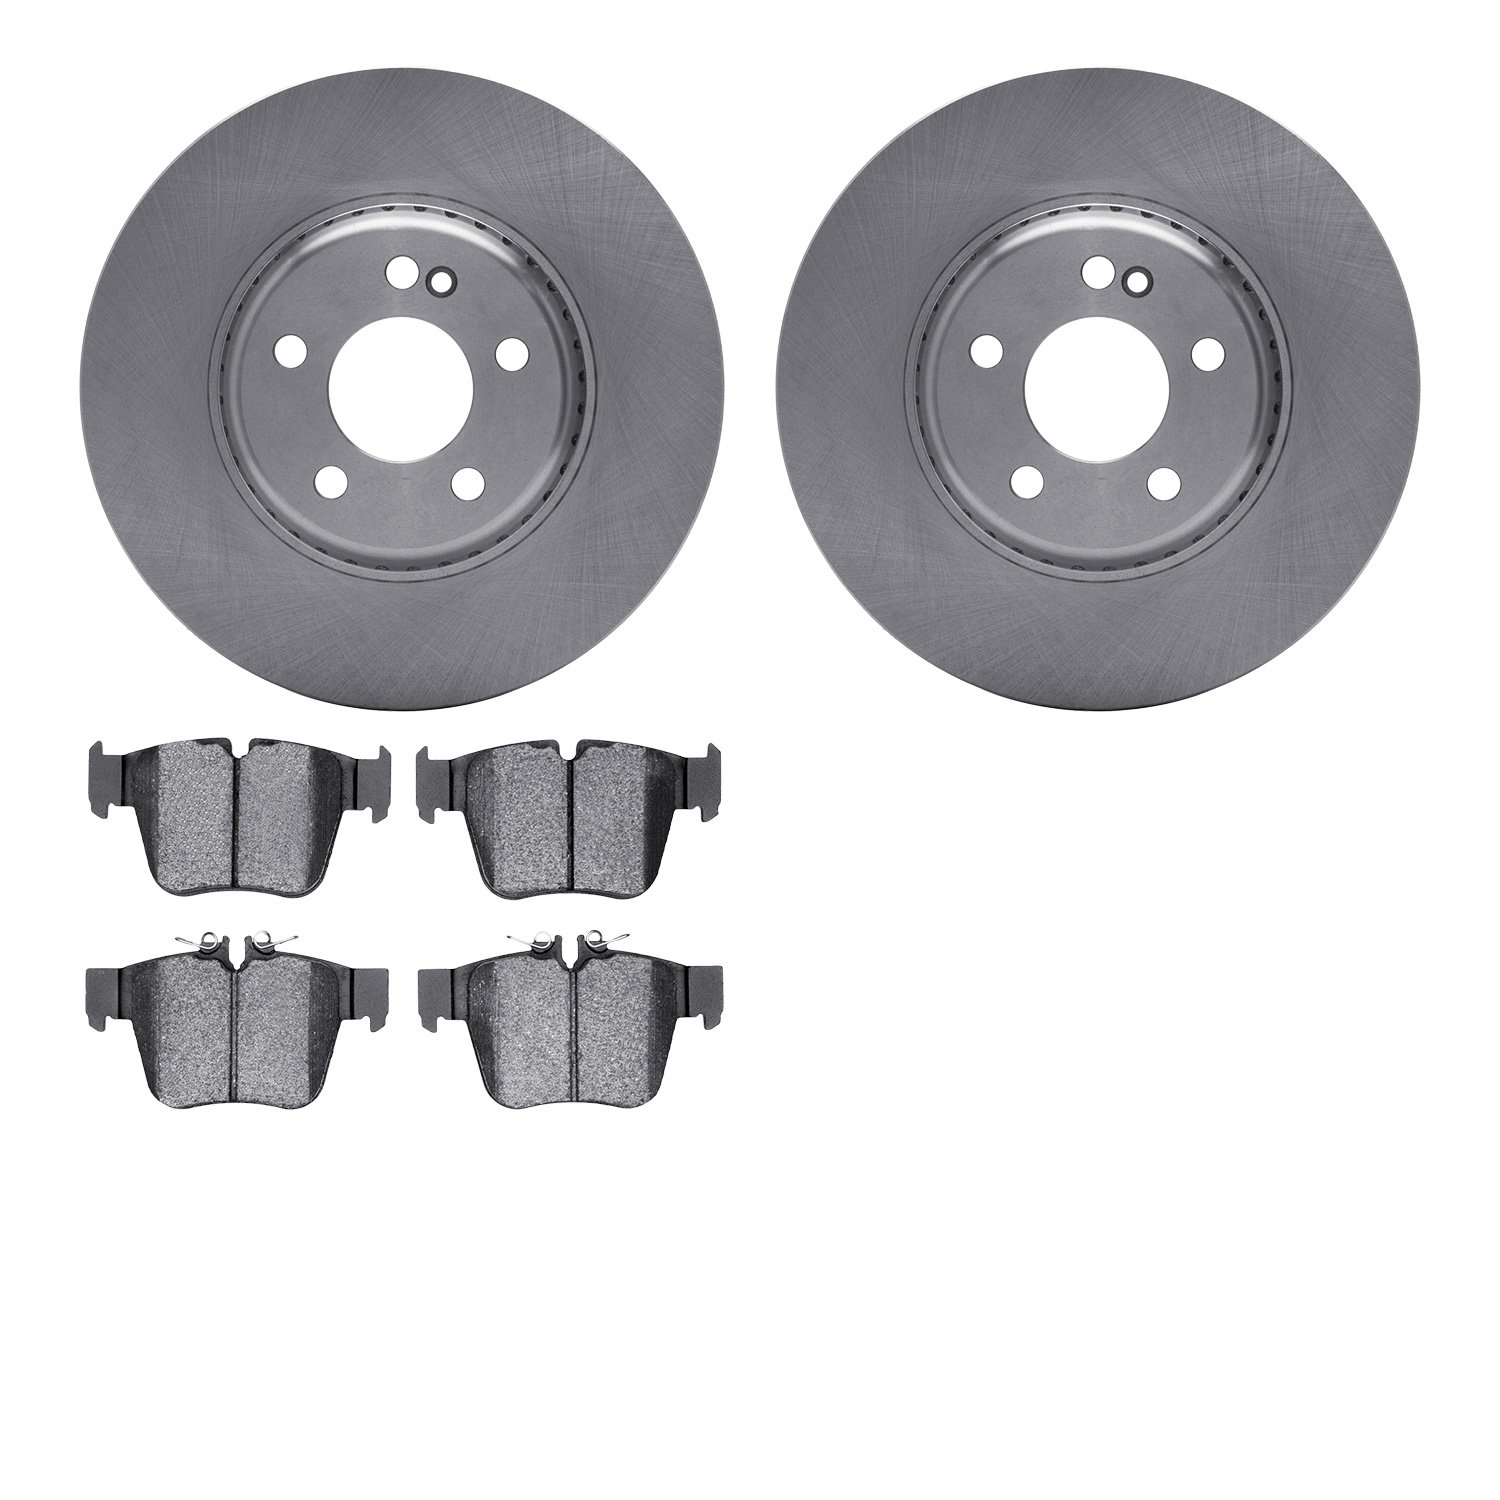 6302-63192 Brake Rotors with 3000-Series Ceramic Brake Pads Kit, Fits Select Mercedes-Benz, Position: Rear